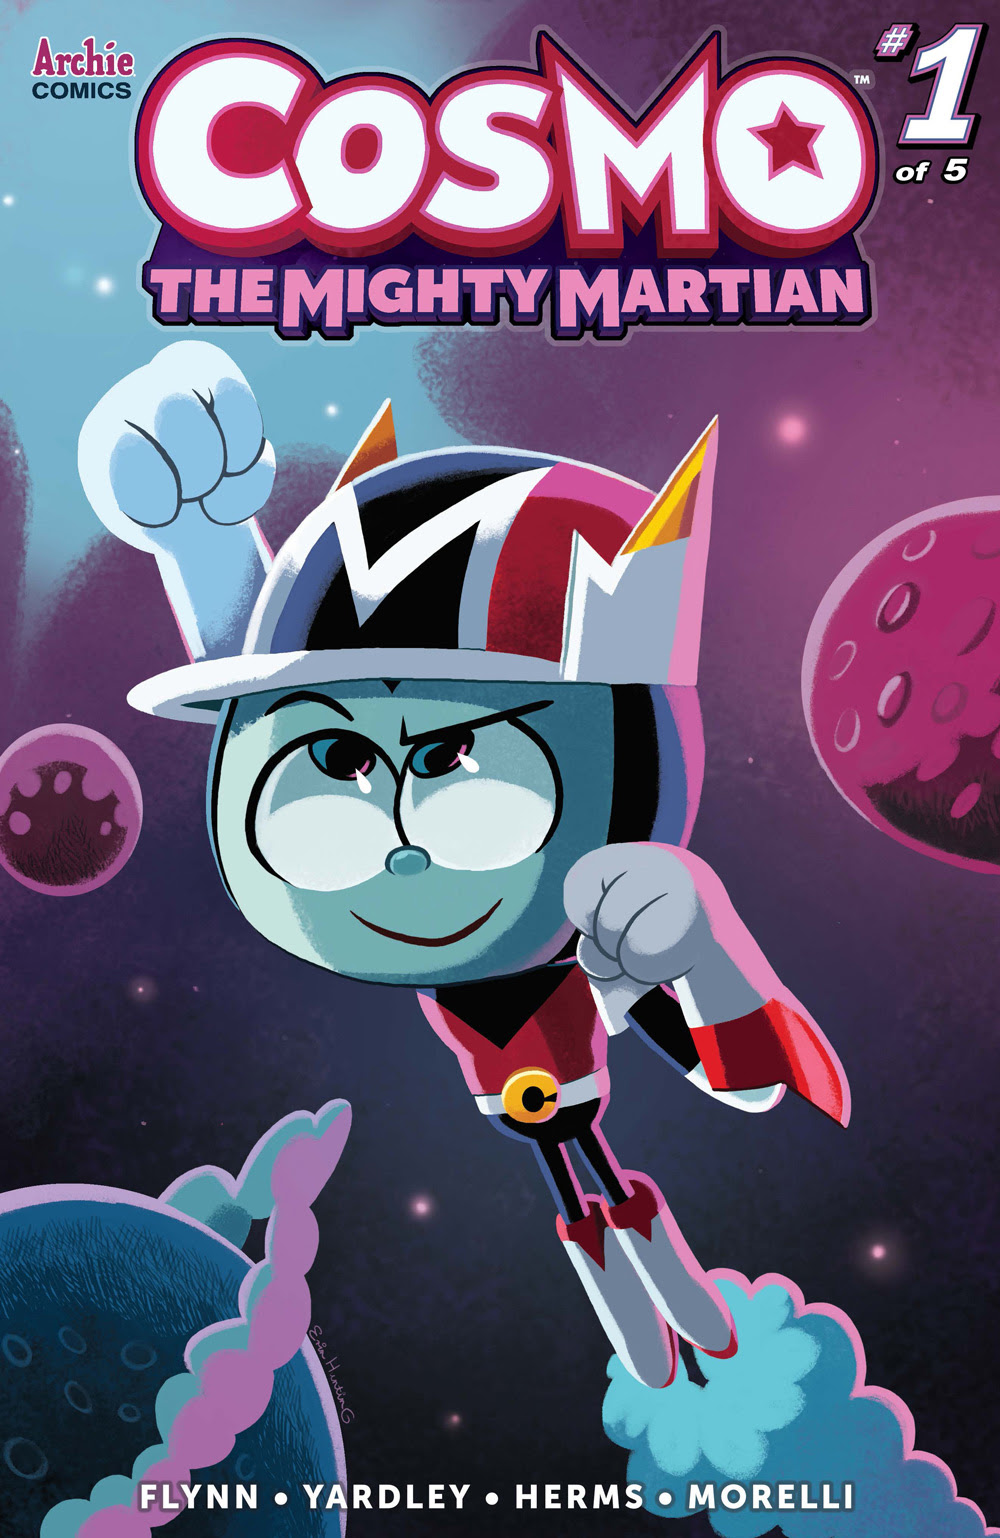 COSMO THE MIGHTY MARTIAN #1: CVR C Hunting